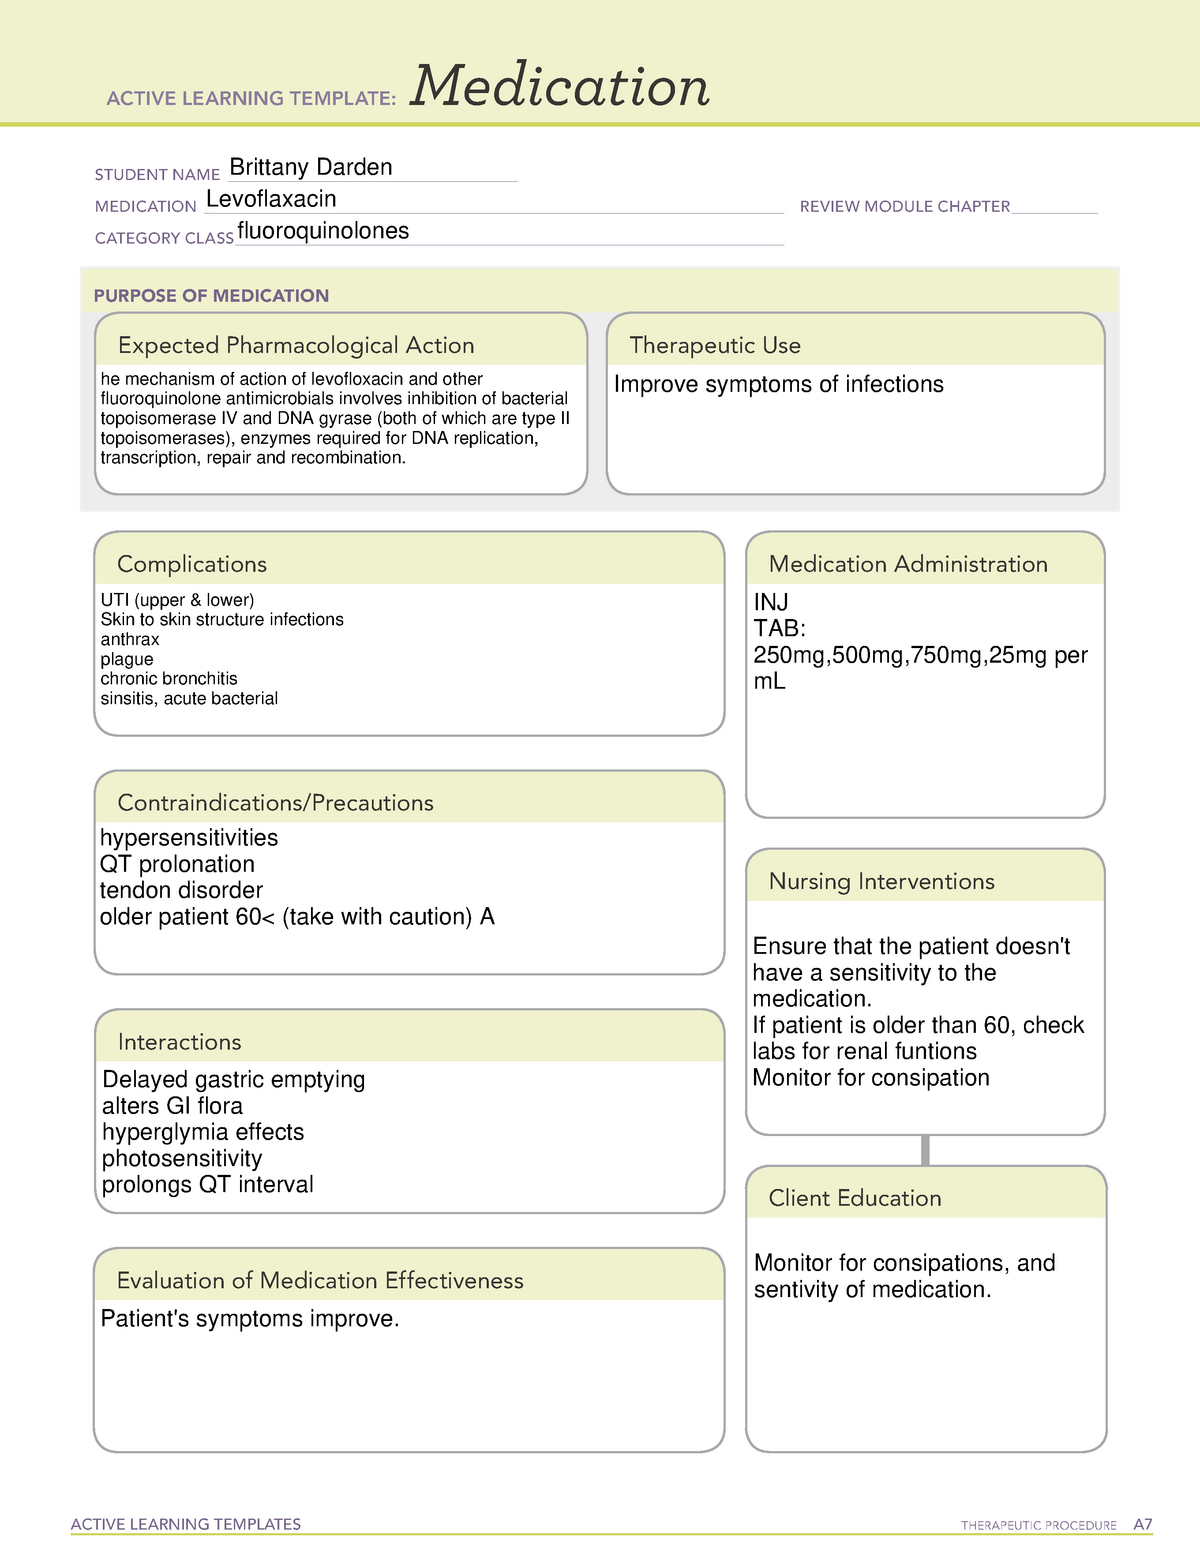 Levoflaxacin Med Card N/A ACTIVE LEARNING TEMPLATES THERAPEUTIC